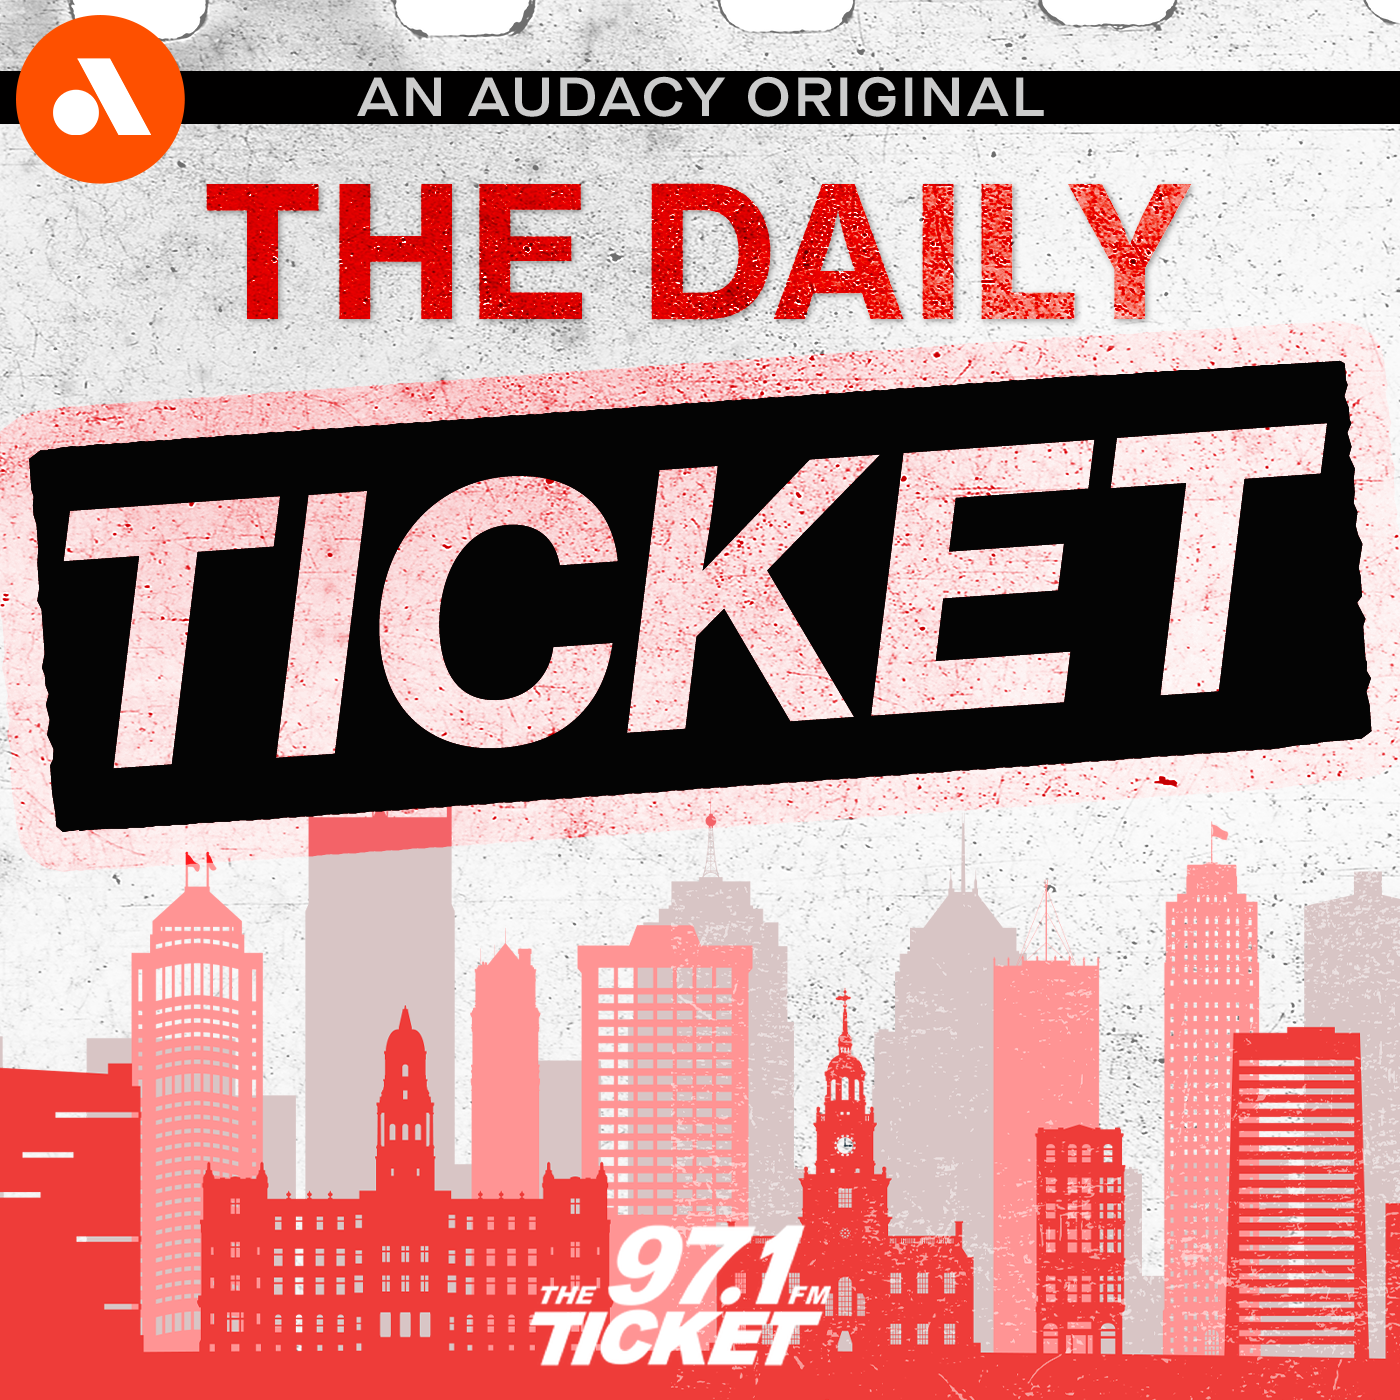 Embarrassing TV Situation Leaves Some Detroit Fans Unable To Watch The Tigers | 'The Daily Ticket'